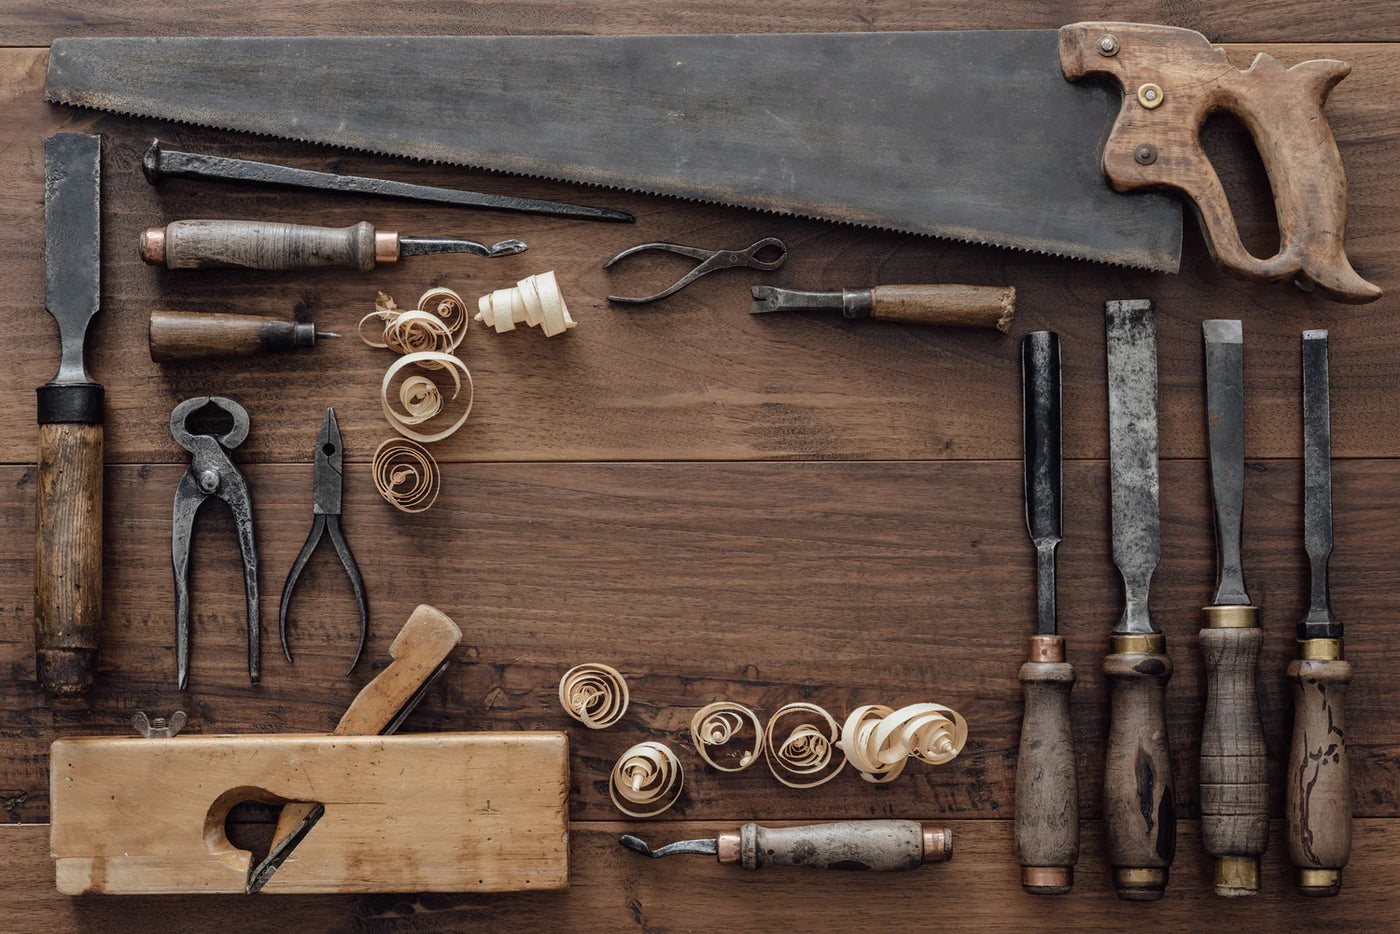 The history of hand tools in Australia